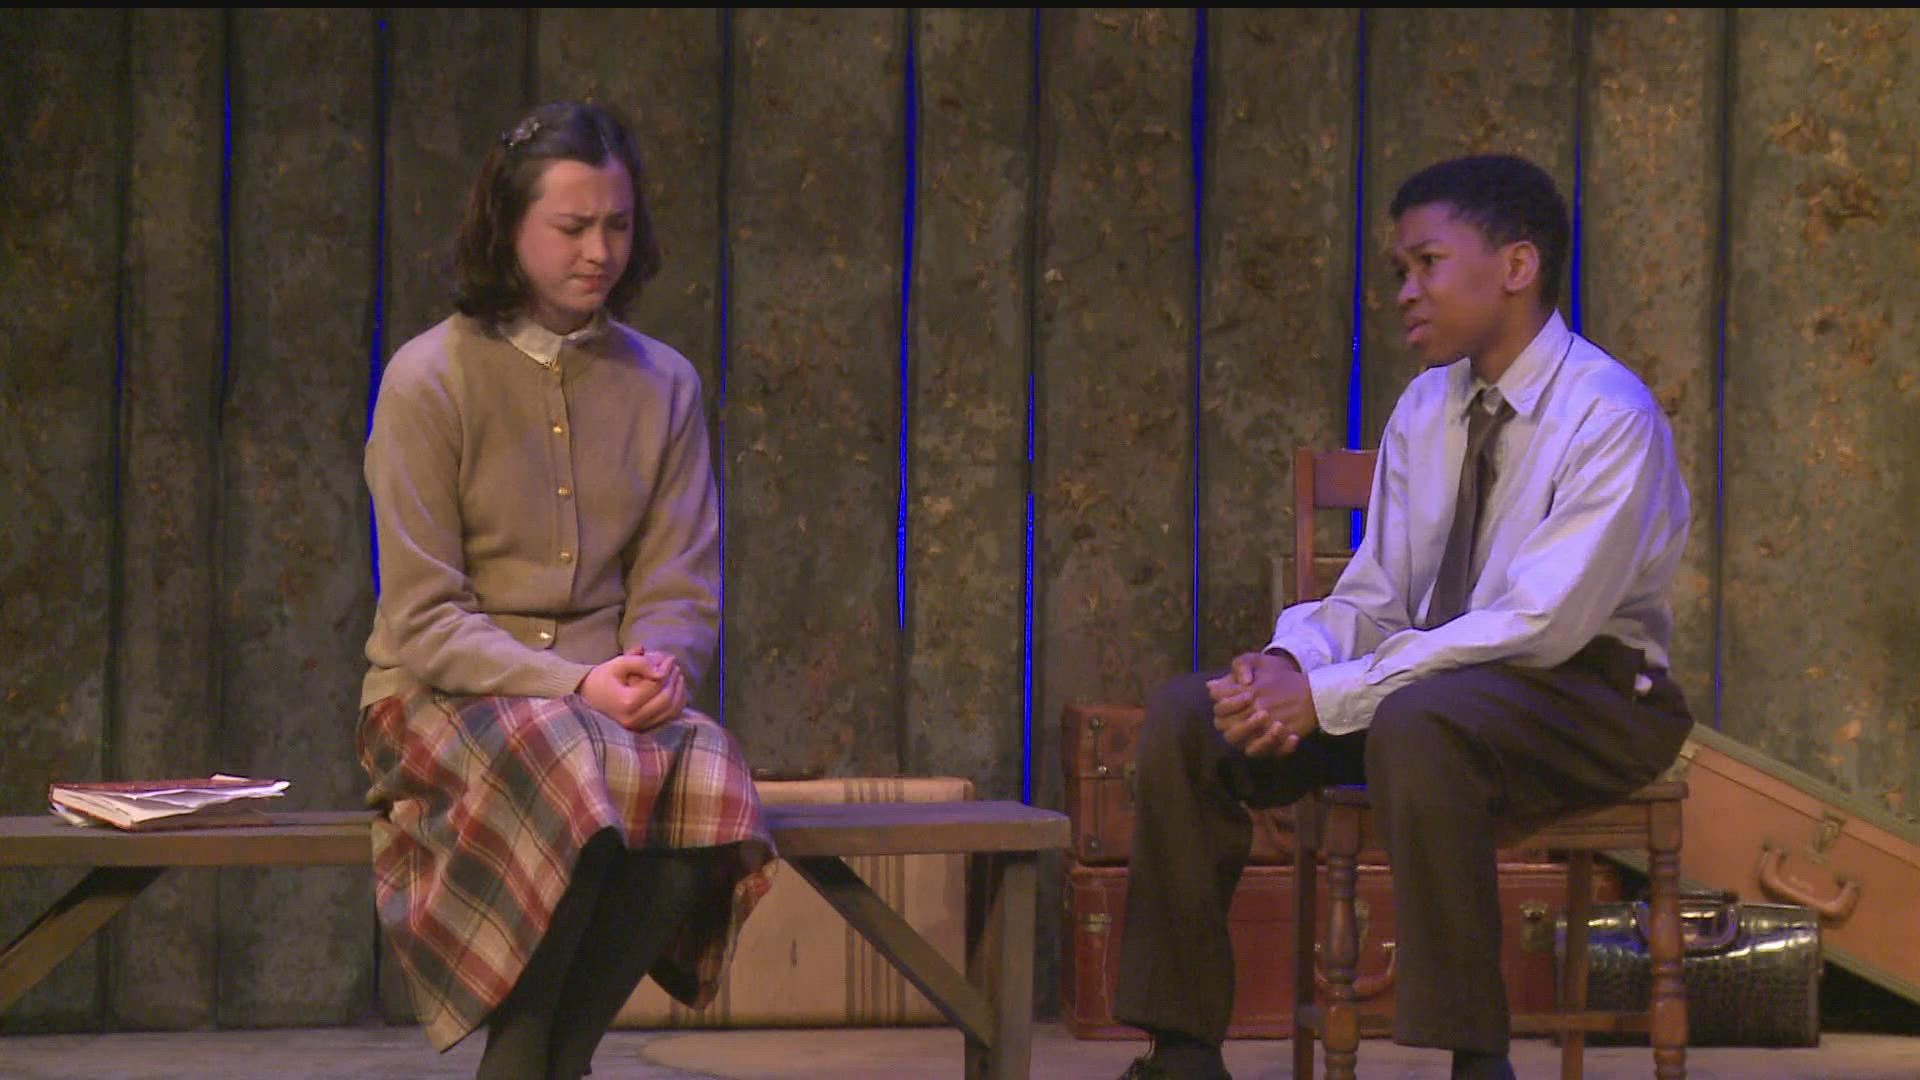 Anne Frank and Emmett Till never met, but they were both victims of racial intolerance and hatred. Now, a playwright has woven their stories into one powerful play.